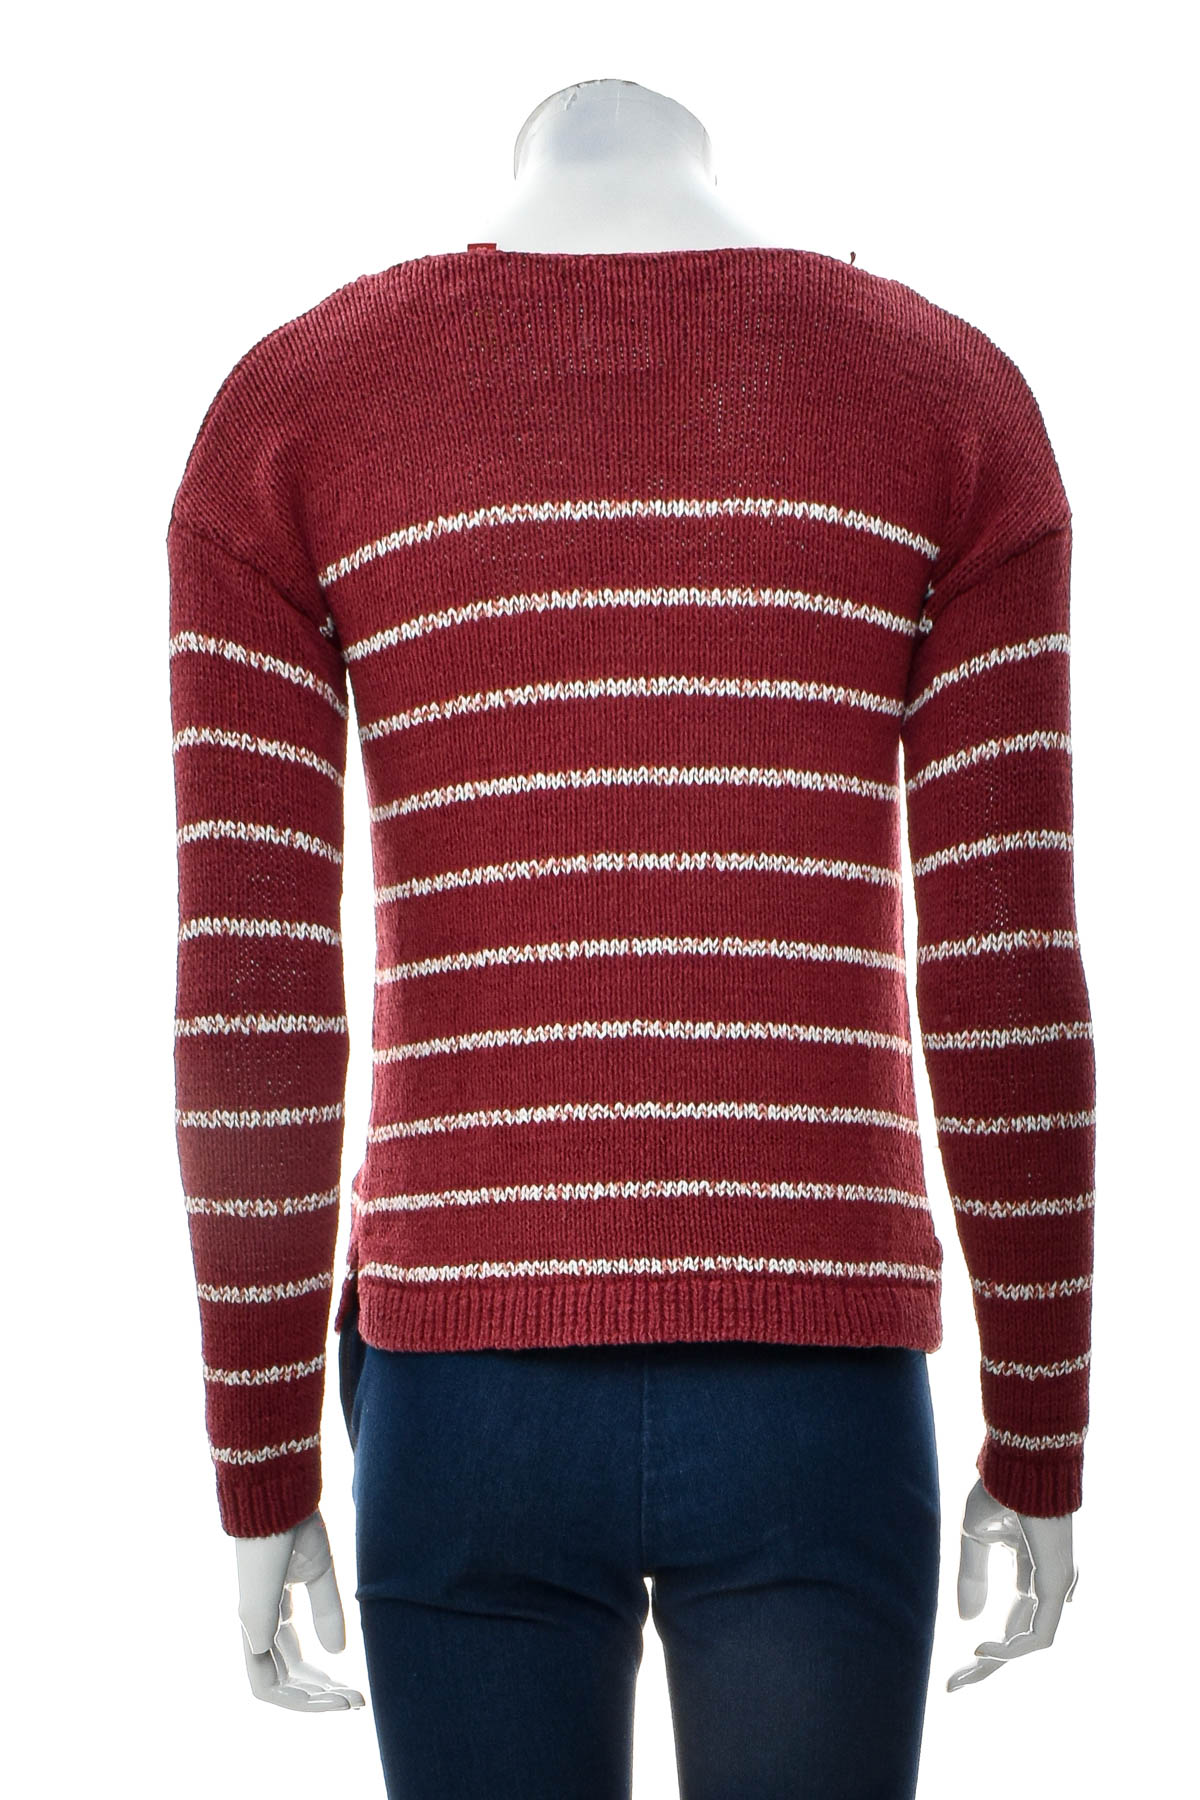 Women's sweater - S.Oliver - 1